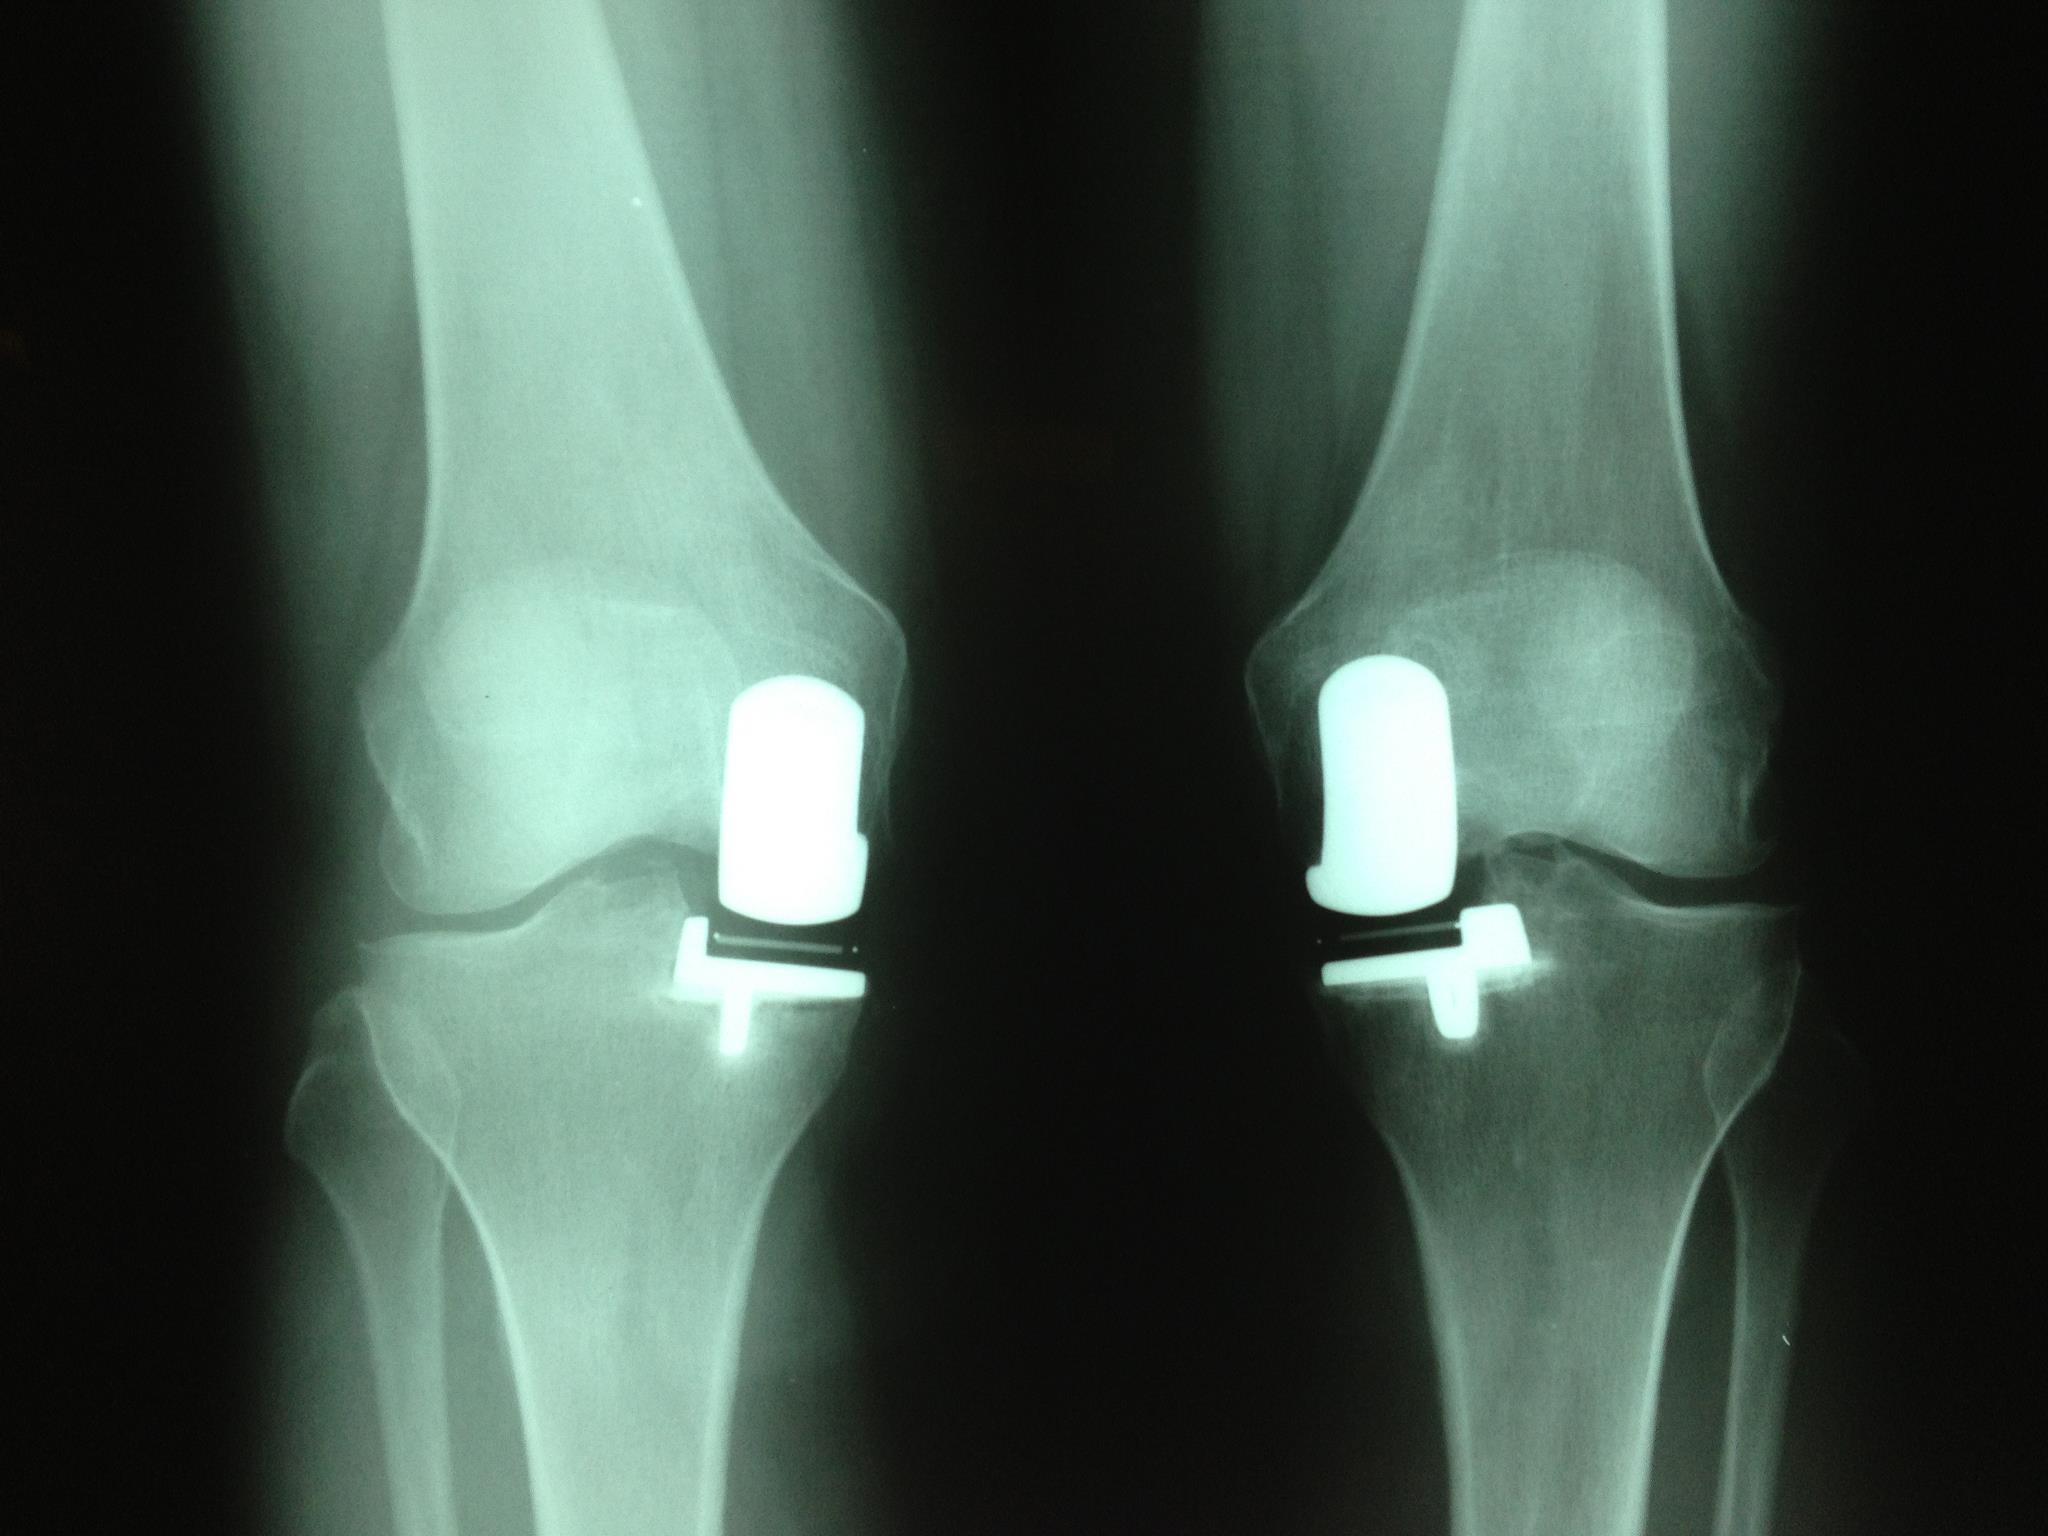 Diana gabaldon has "science fiction" new partial knee replacements!